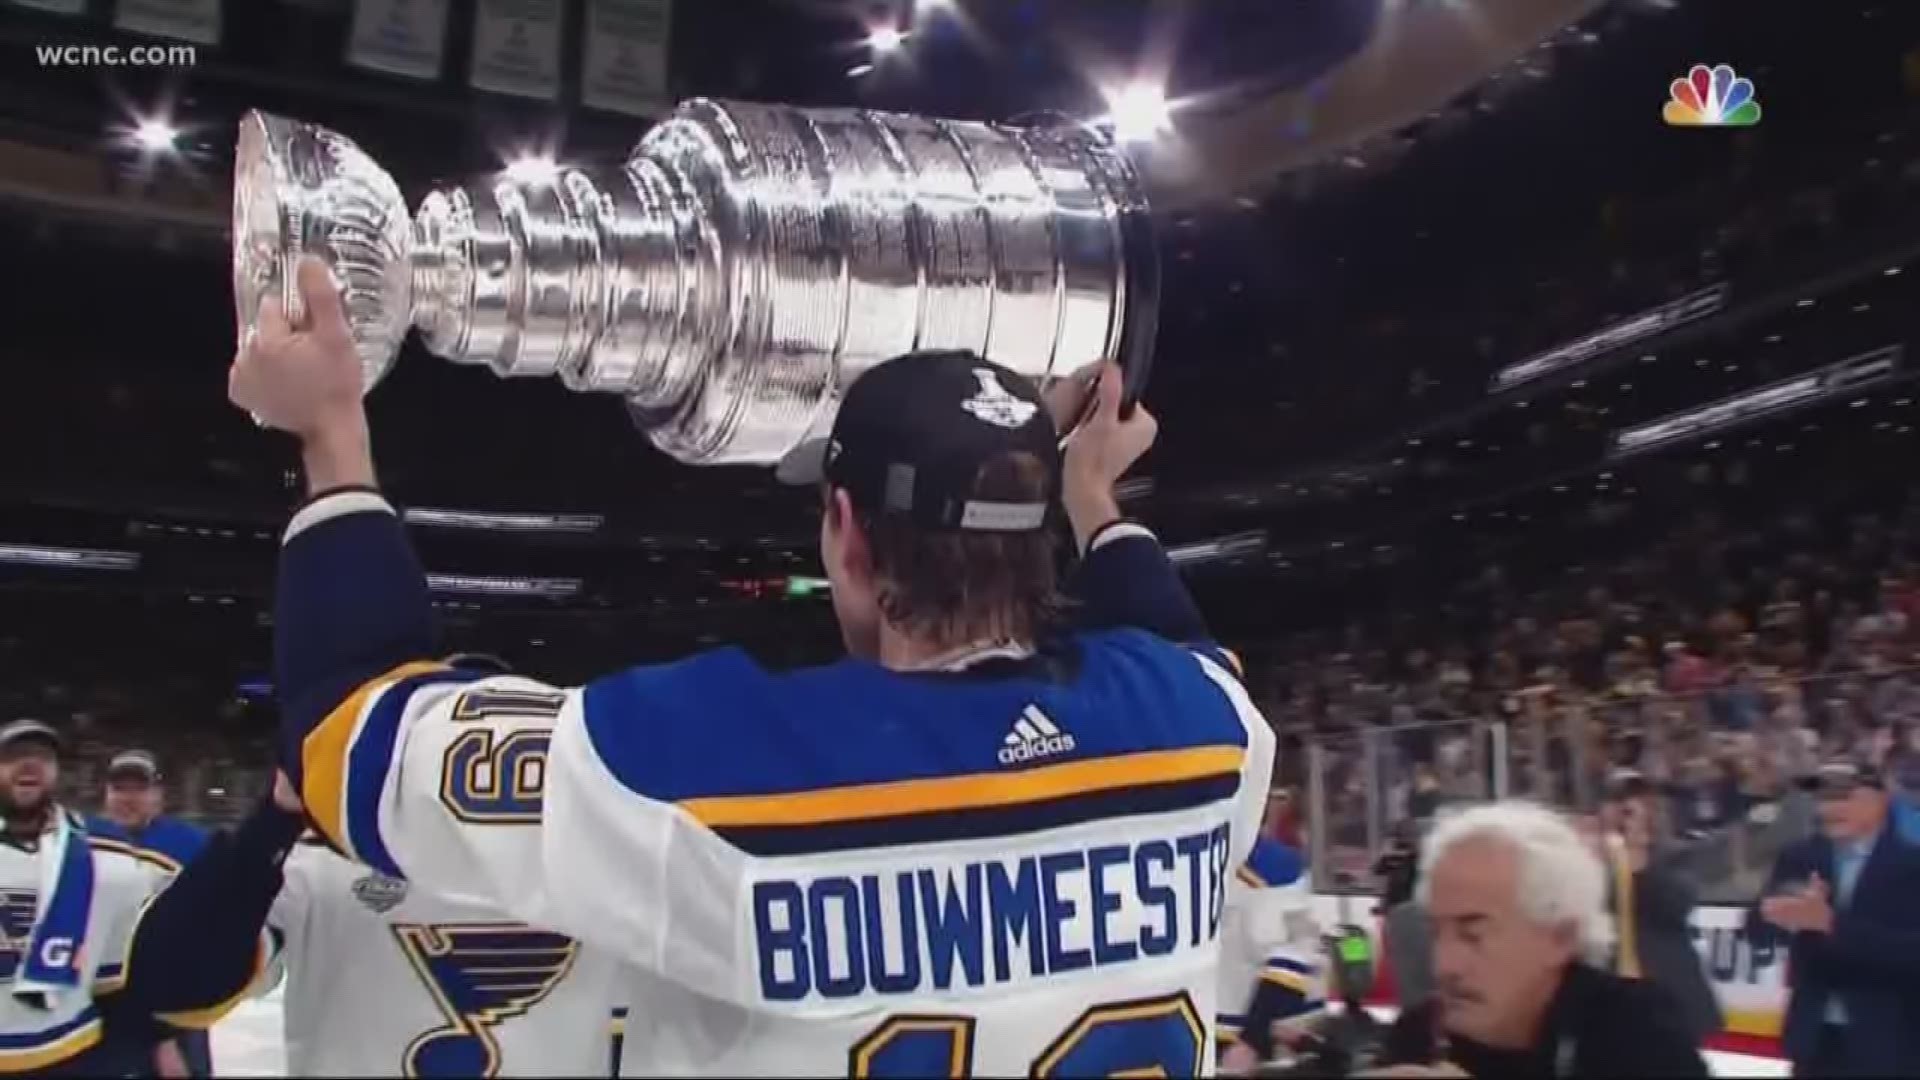 America is singing Laura Branigan's hit "Gloria" after the St. Louis Blues finally won the Stanley Cup for the first time.